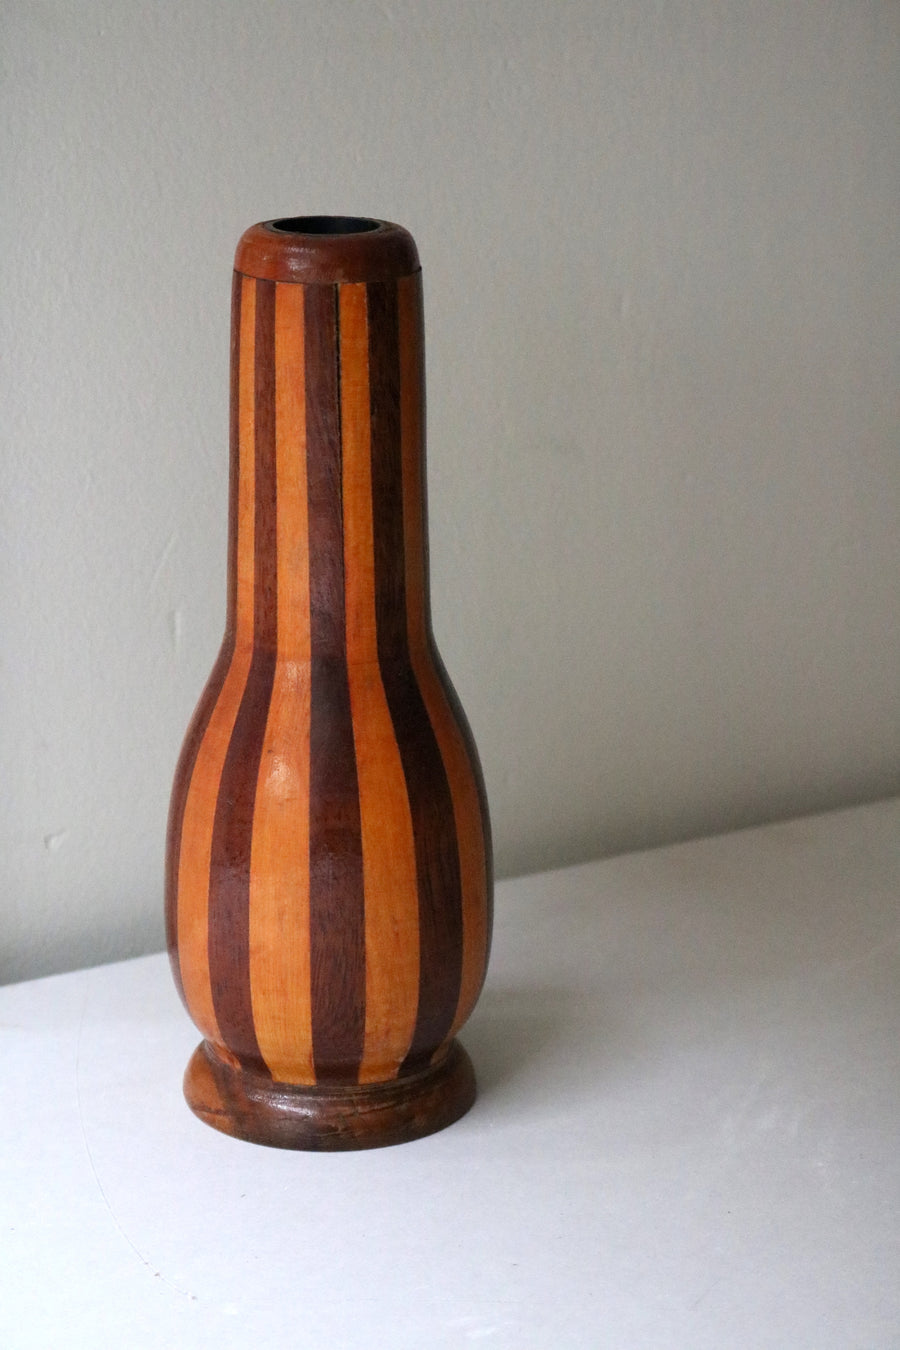 Striped wood Vase - Form + Beyond graphic mirrors & wall art gallery london